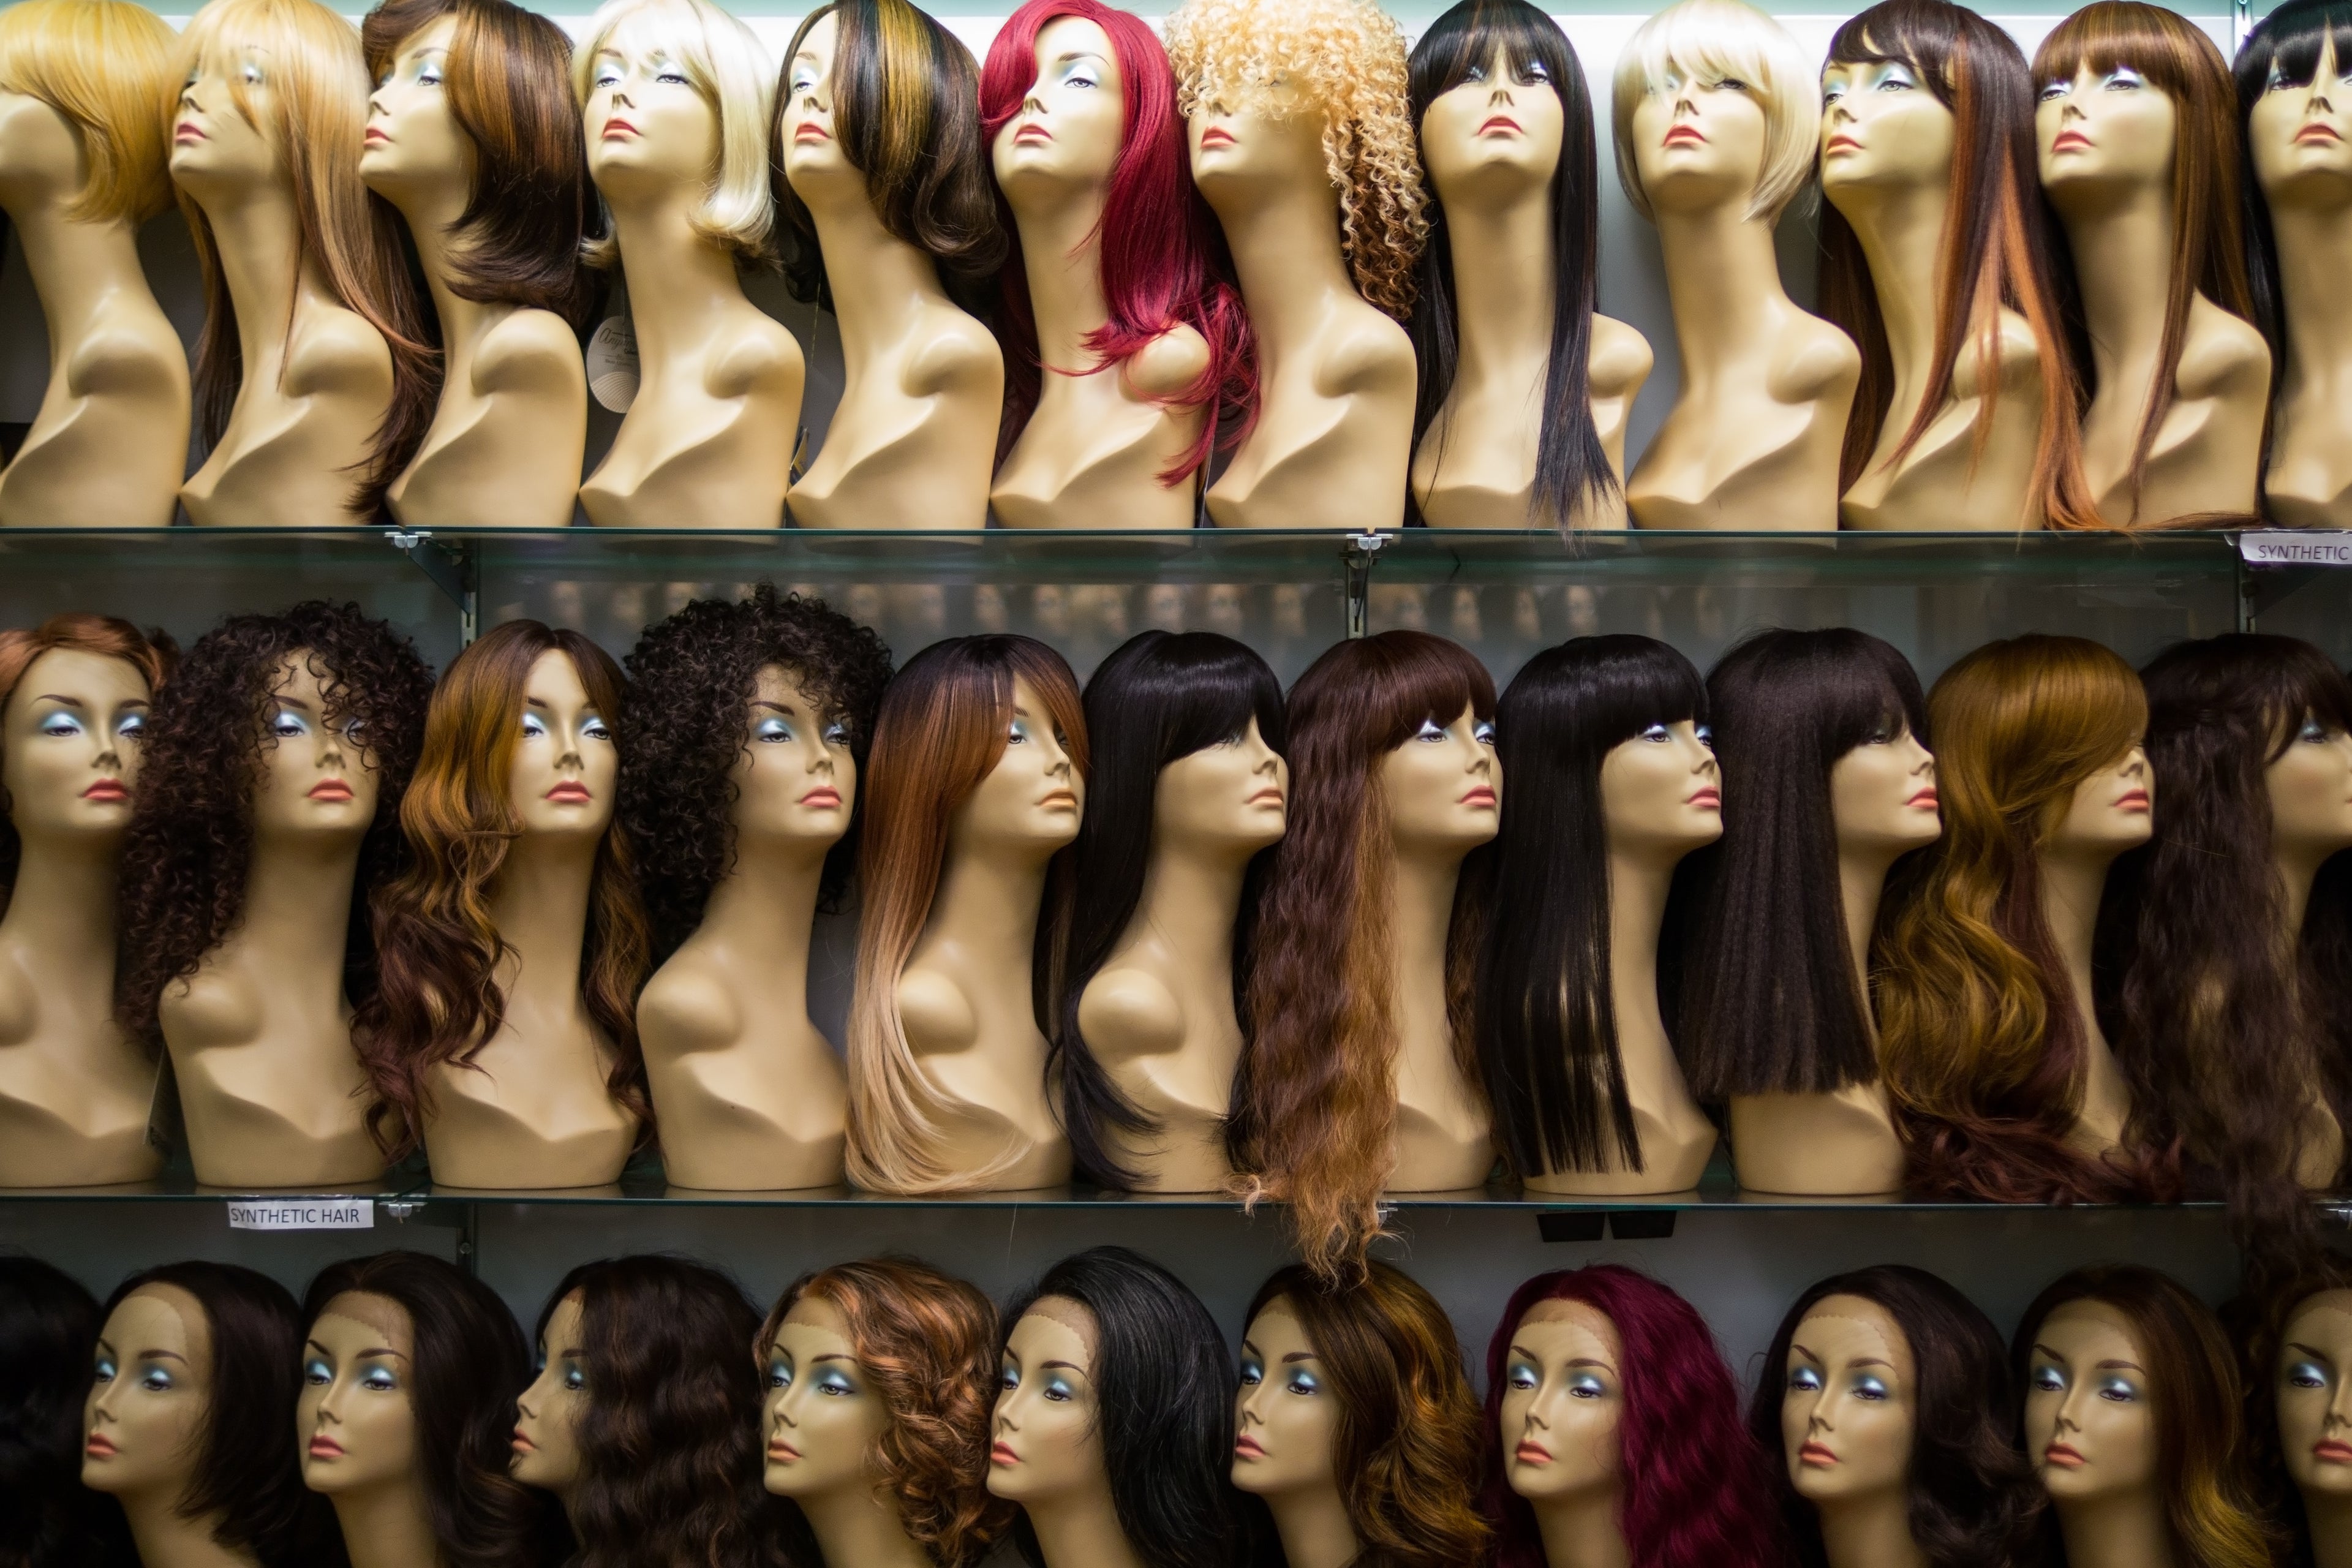 Pink Parachute has a variety of wigs/alternative hair products for you.